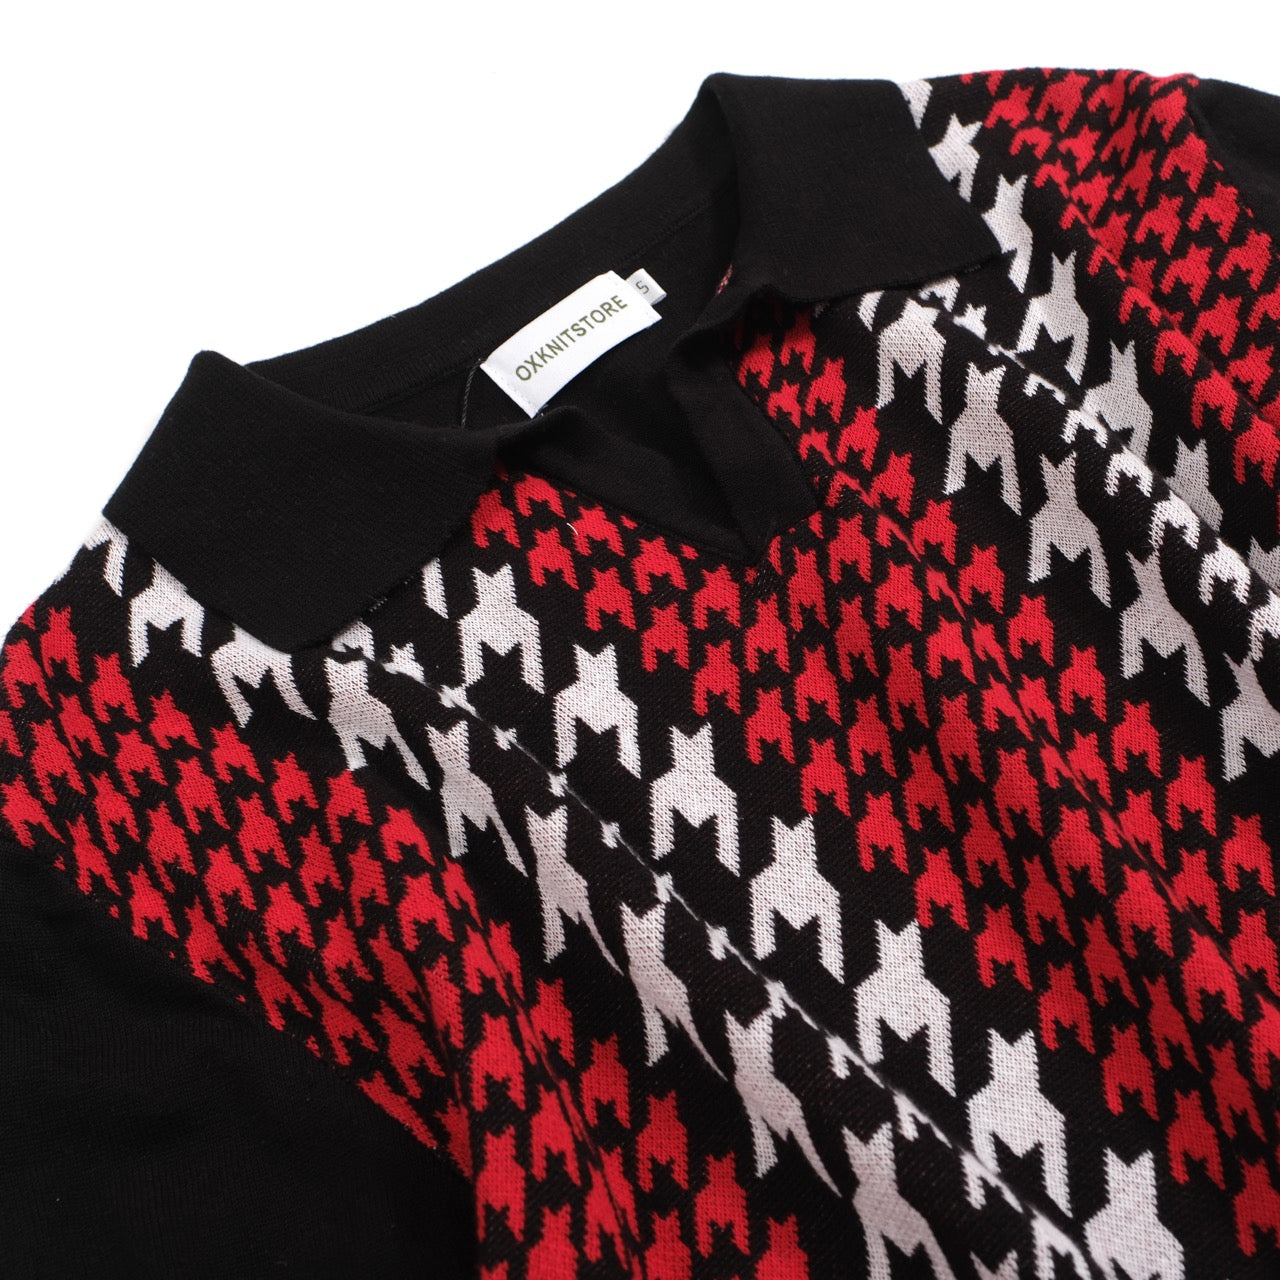 Men's Casual Retro Red White Houndstooth Black Knitted Polo Shirt